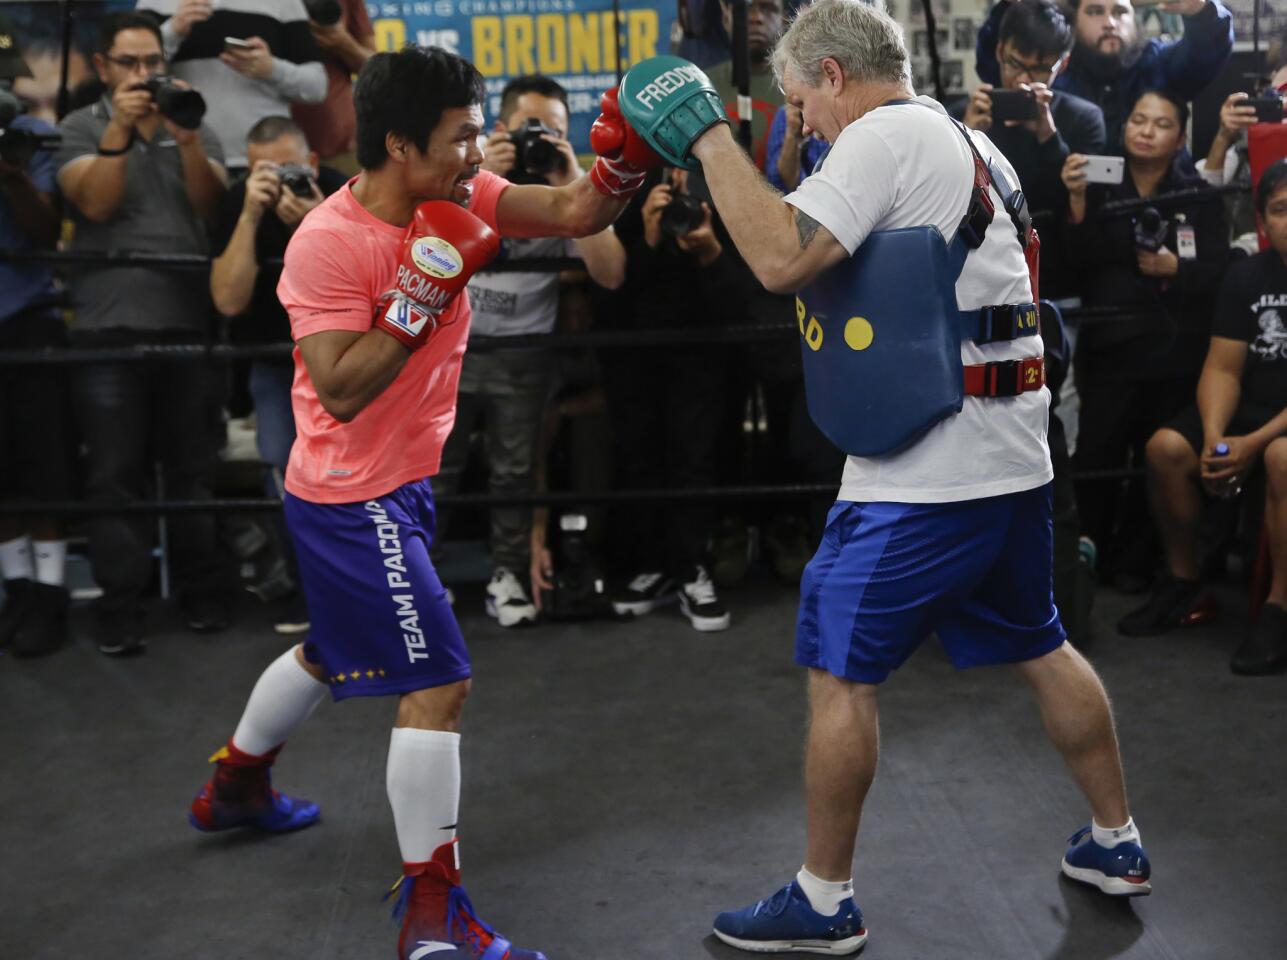 Manny Pacquiao, left, works out with trainer Freddie Roach at a boxing club in Los Angeles, Wednesday, Jan. 9, 2019. Pacquiao is scheduled to defend his WBA welterweight title against Adrien Broner on Jan. 19, 2019, in Las Vegas. (AP Photo/Damian Dovarganes)